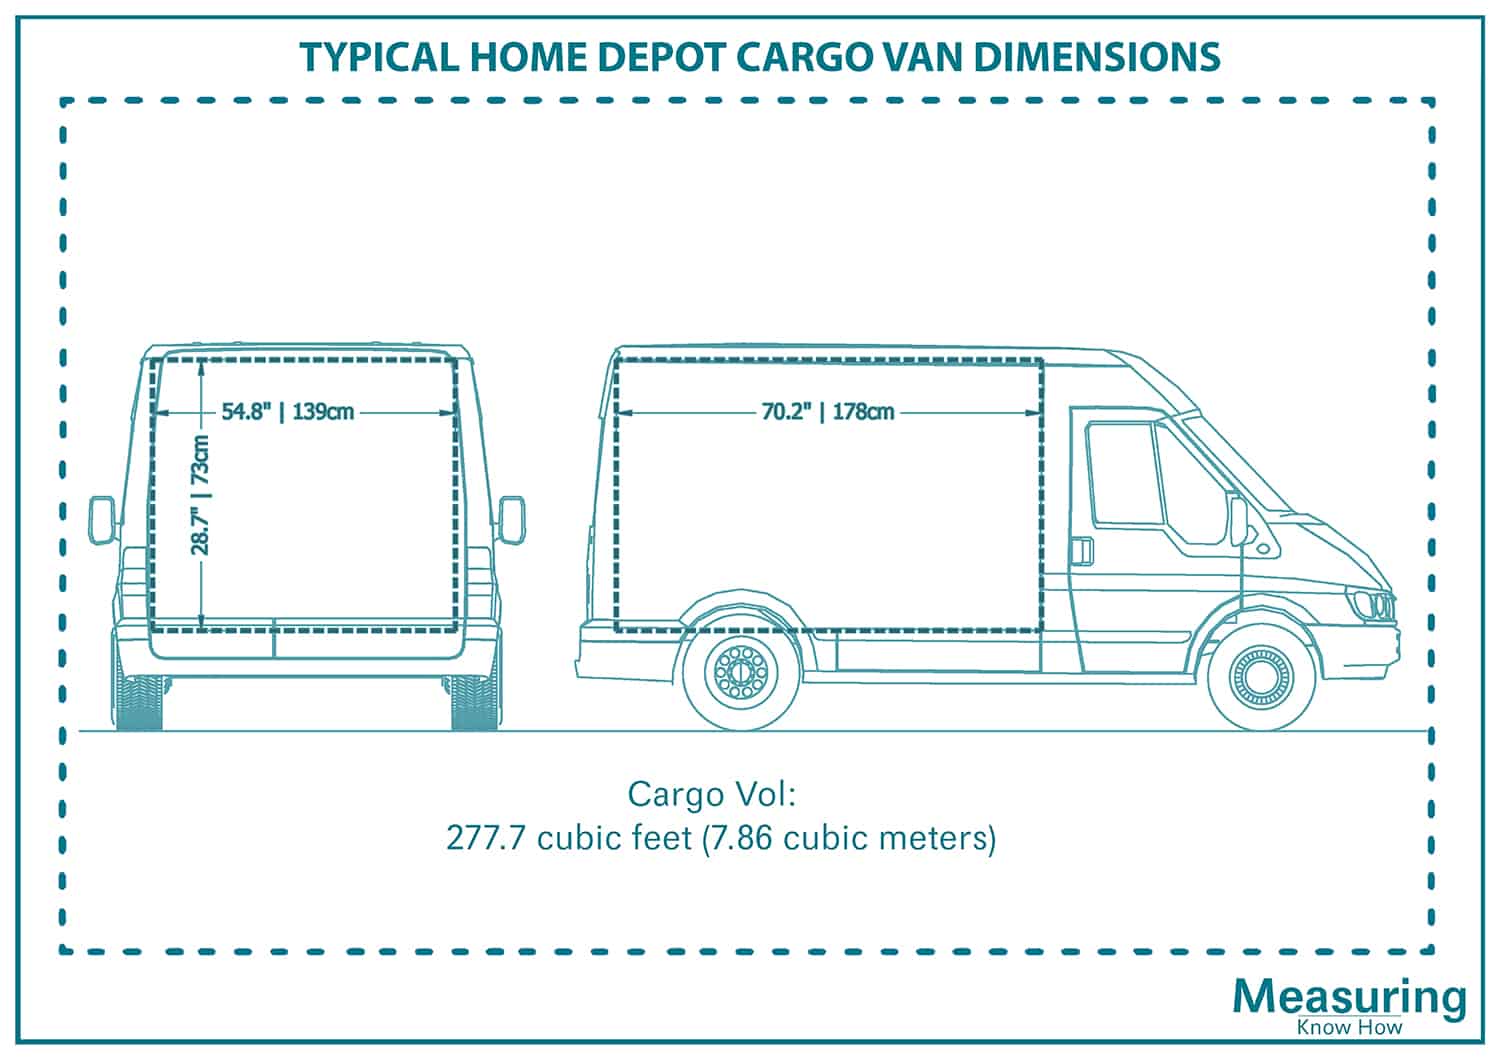 Typical Home Depot cargo van dimensions